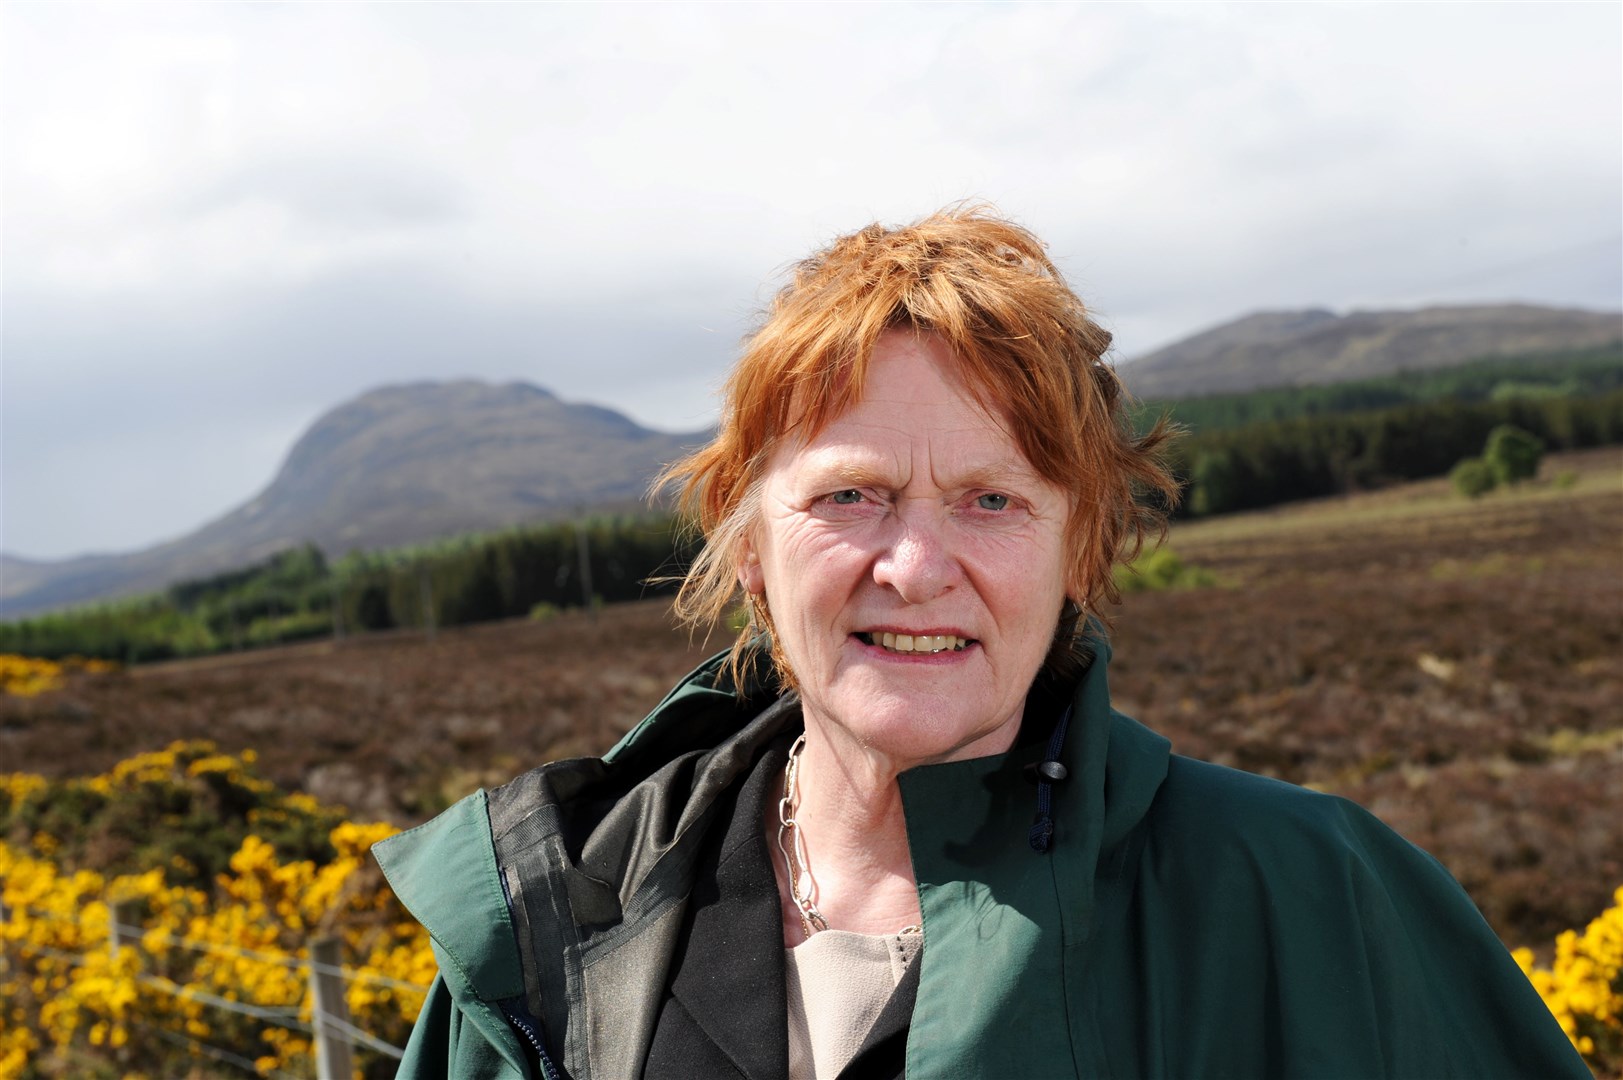 Margaret Davidson, leader of Highland Council, has welcomed the targeted approach, though the hospitality sector will be hit by the restrictions.